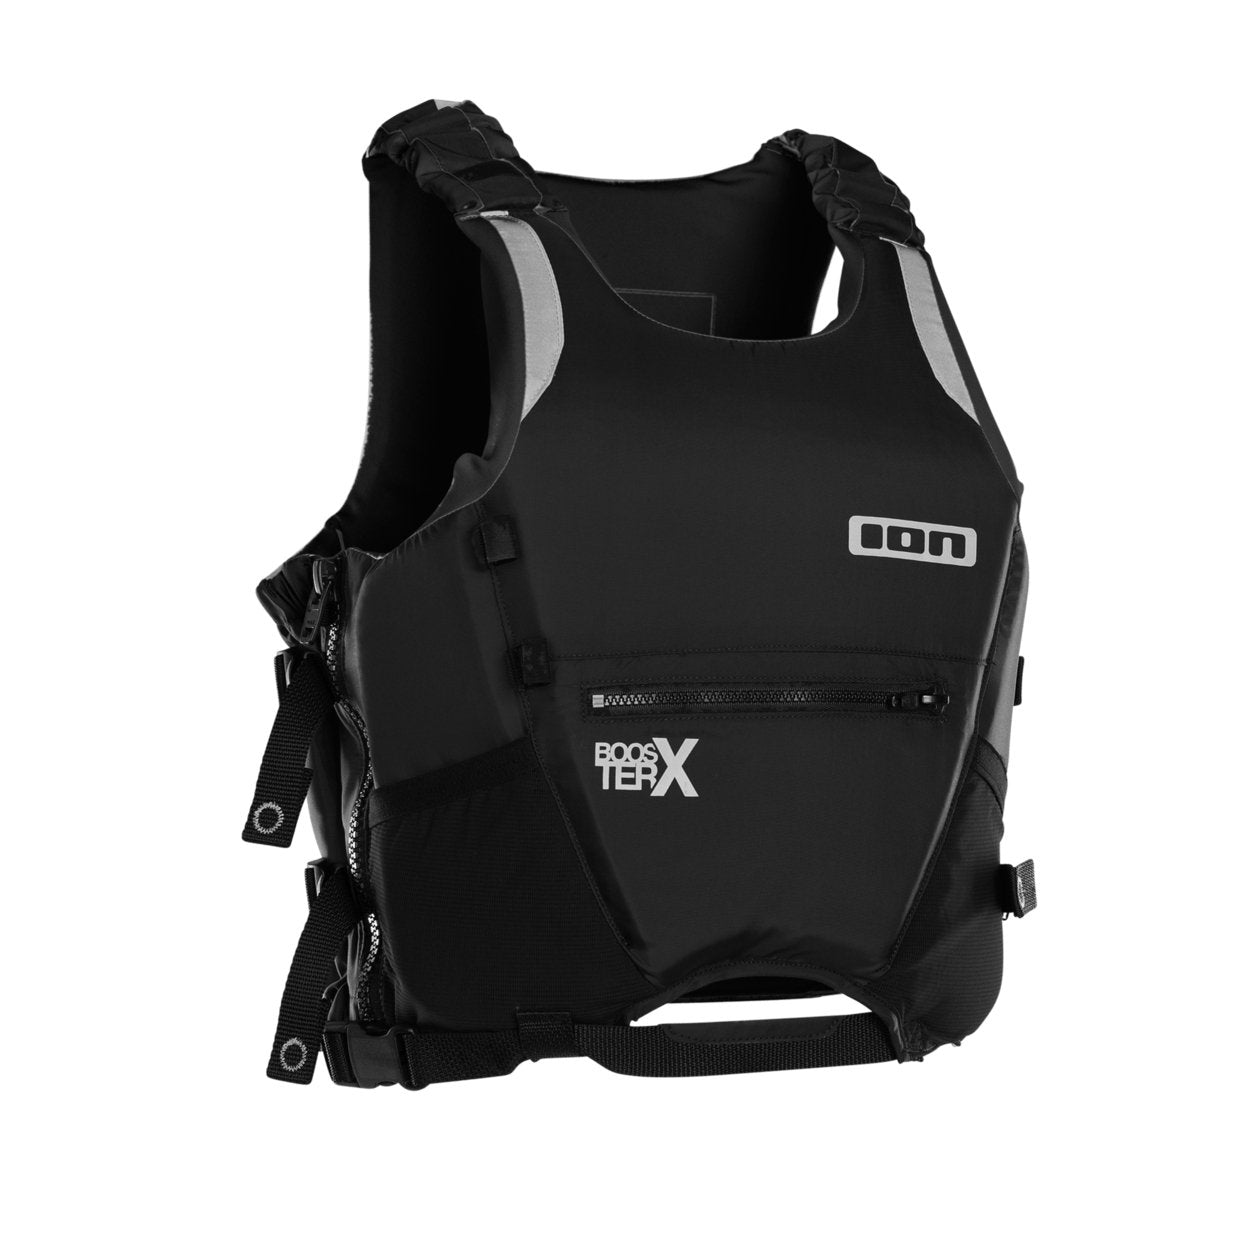 ION Booster X Vest Side Zip 2022 - Worthing Watersports - 9008415982530 - Protection - ION Water